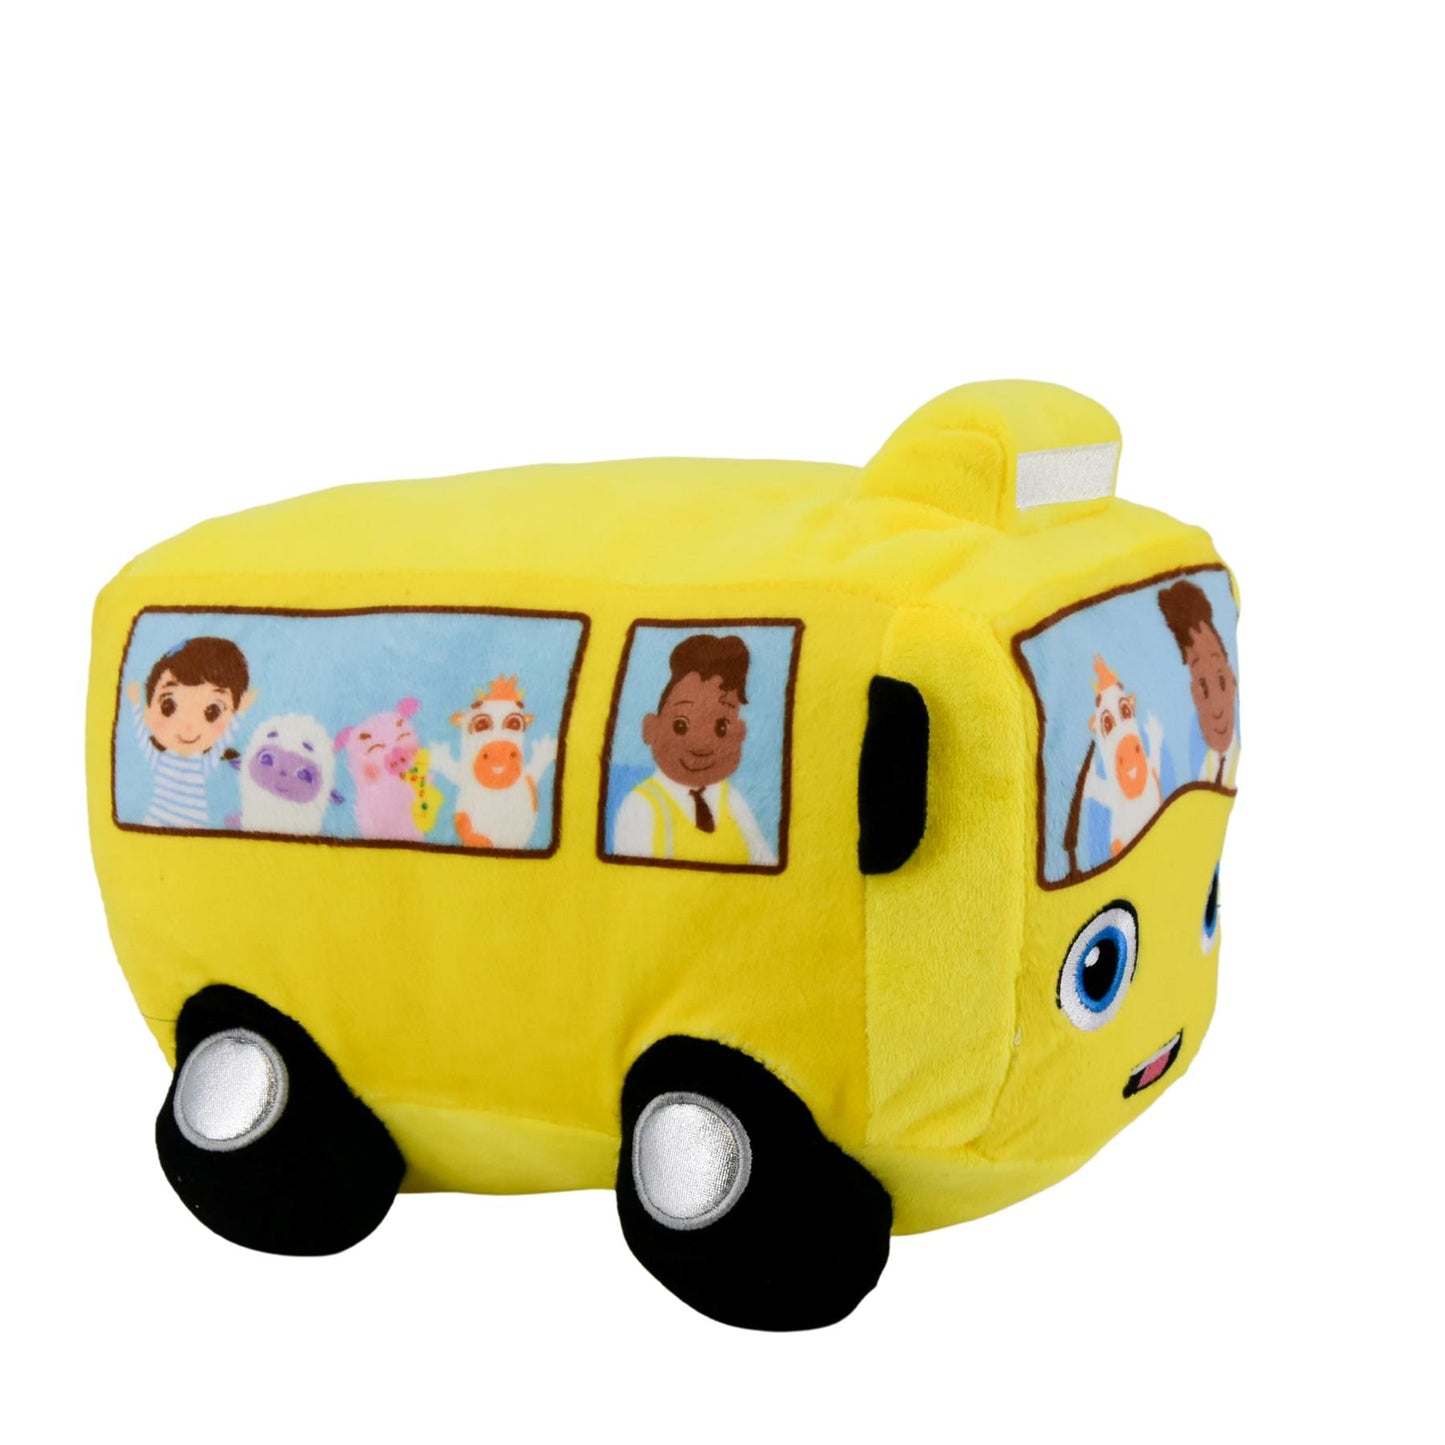 Little Baby Bum Bus Plush Toy by The Magic Toy Shop - UKBuyZone